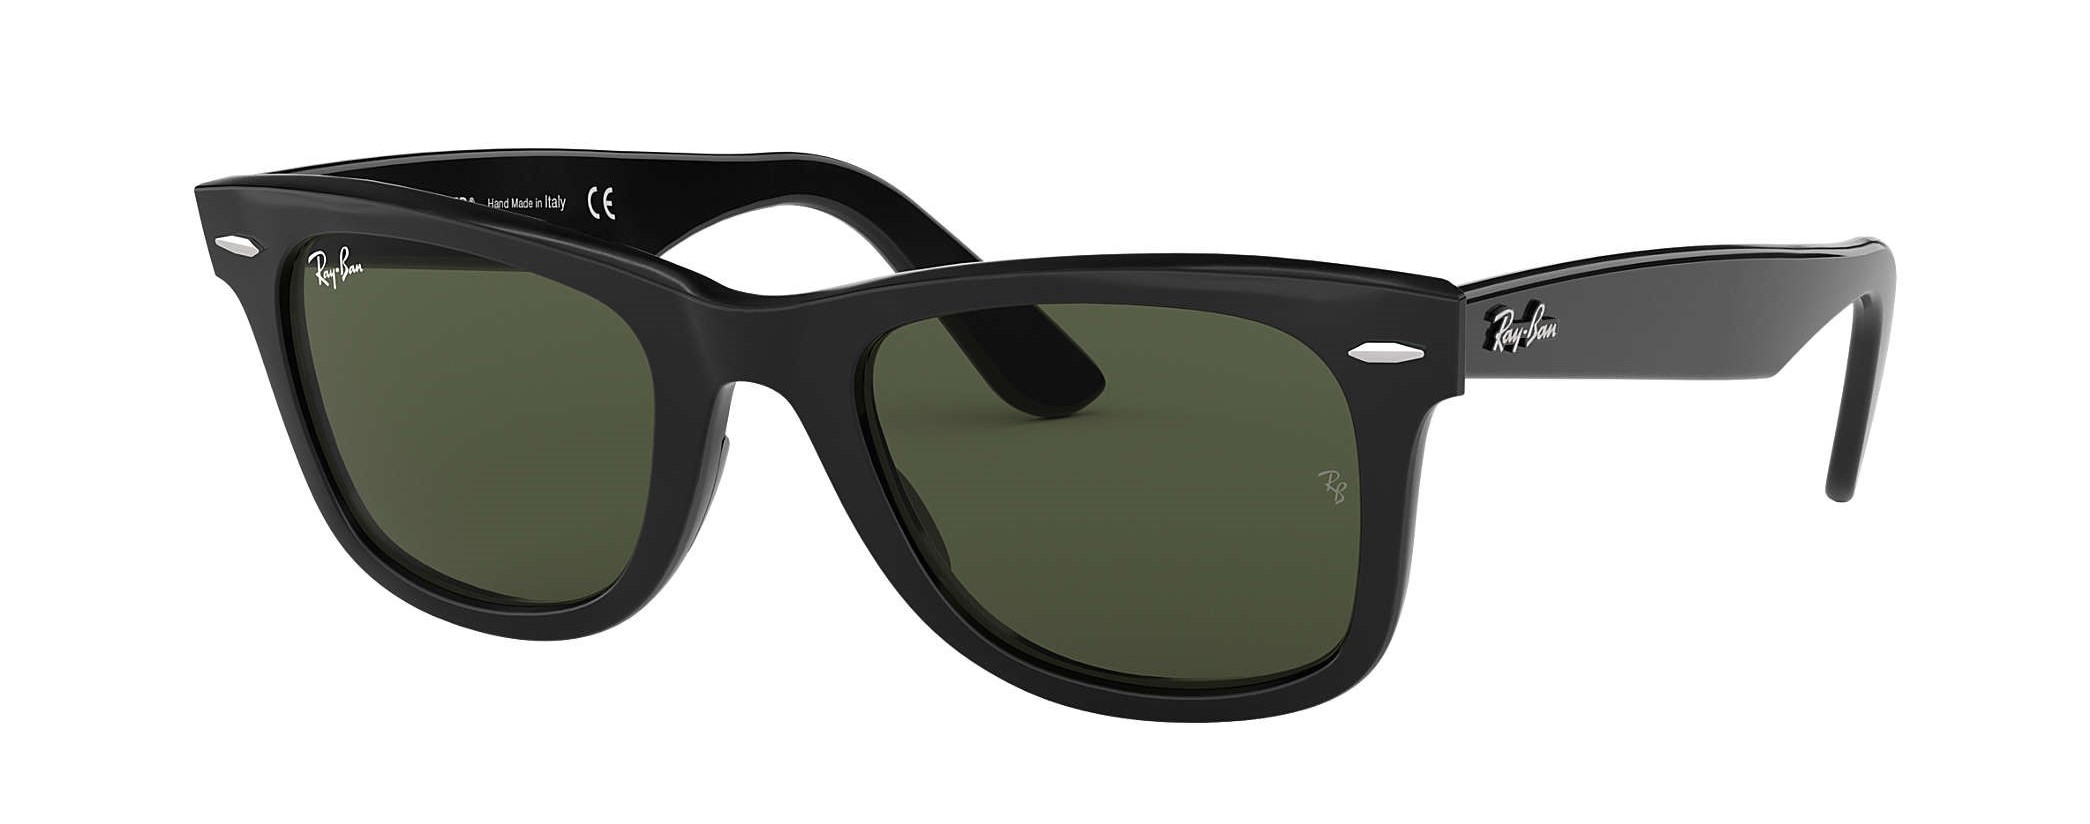 2021 Ray-Ban Sunglasses Gift Guide - Ray-Ban RB2140 Original Wayfarer in black with green g-15 lenses